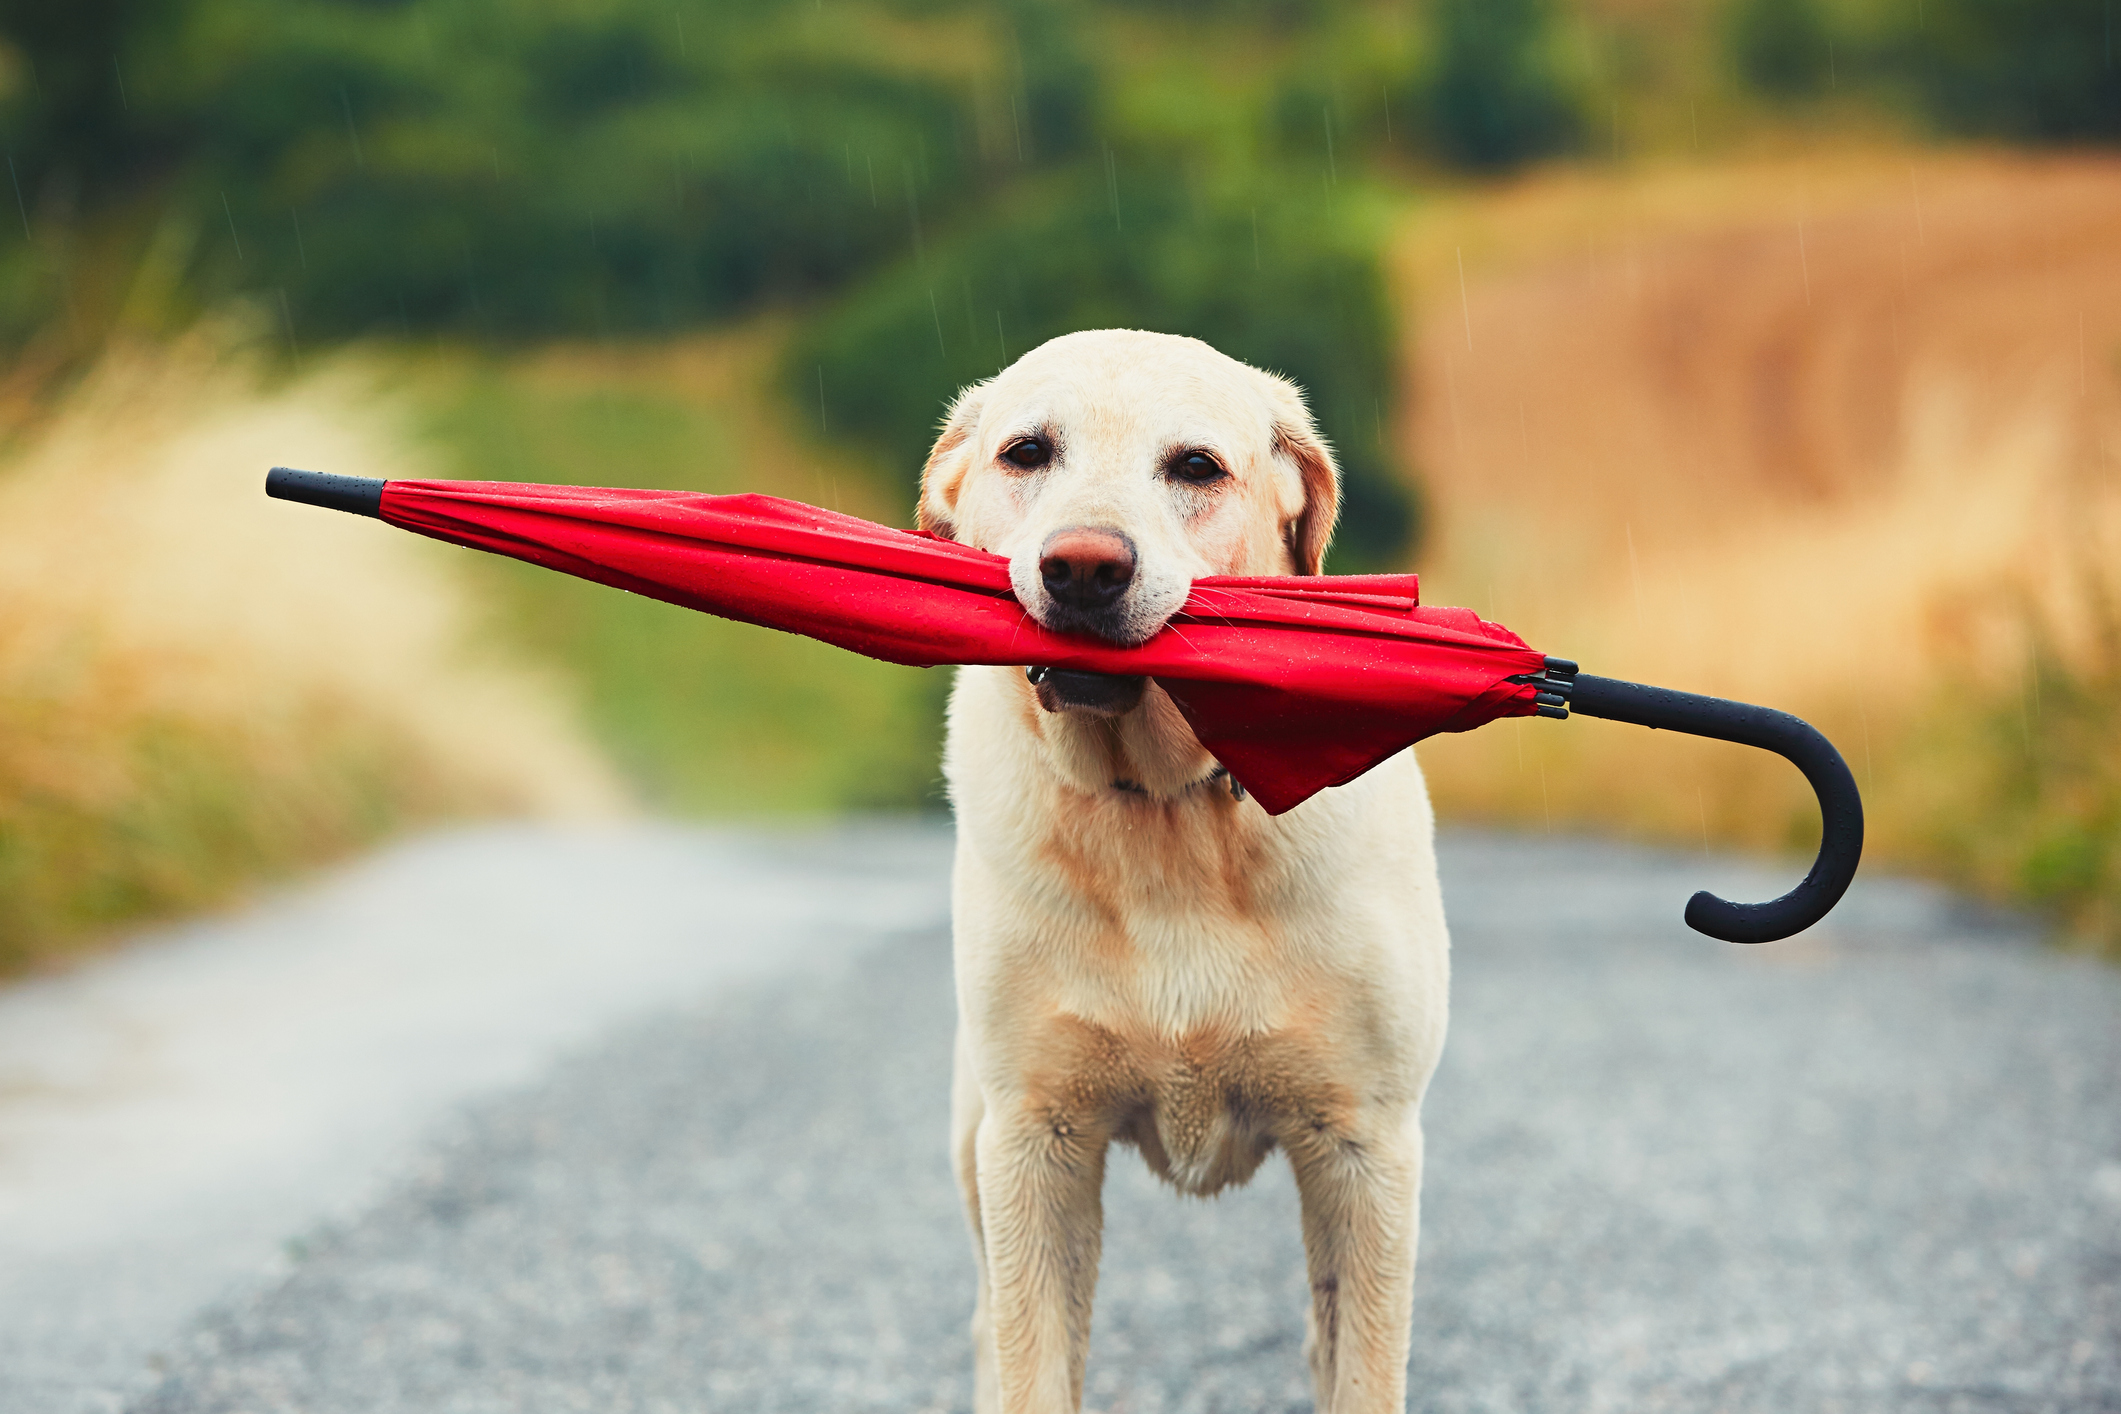 Internet Obsessed With Man Using Umbrella to Shield Puppy From Rain